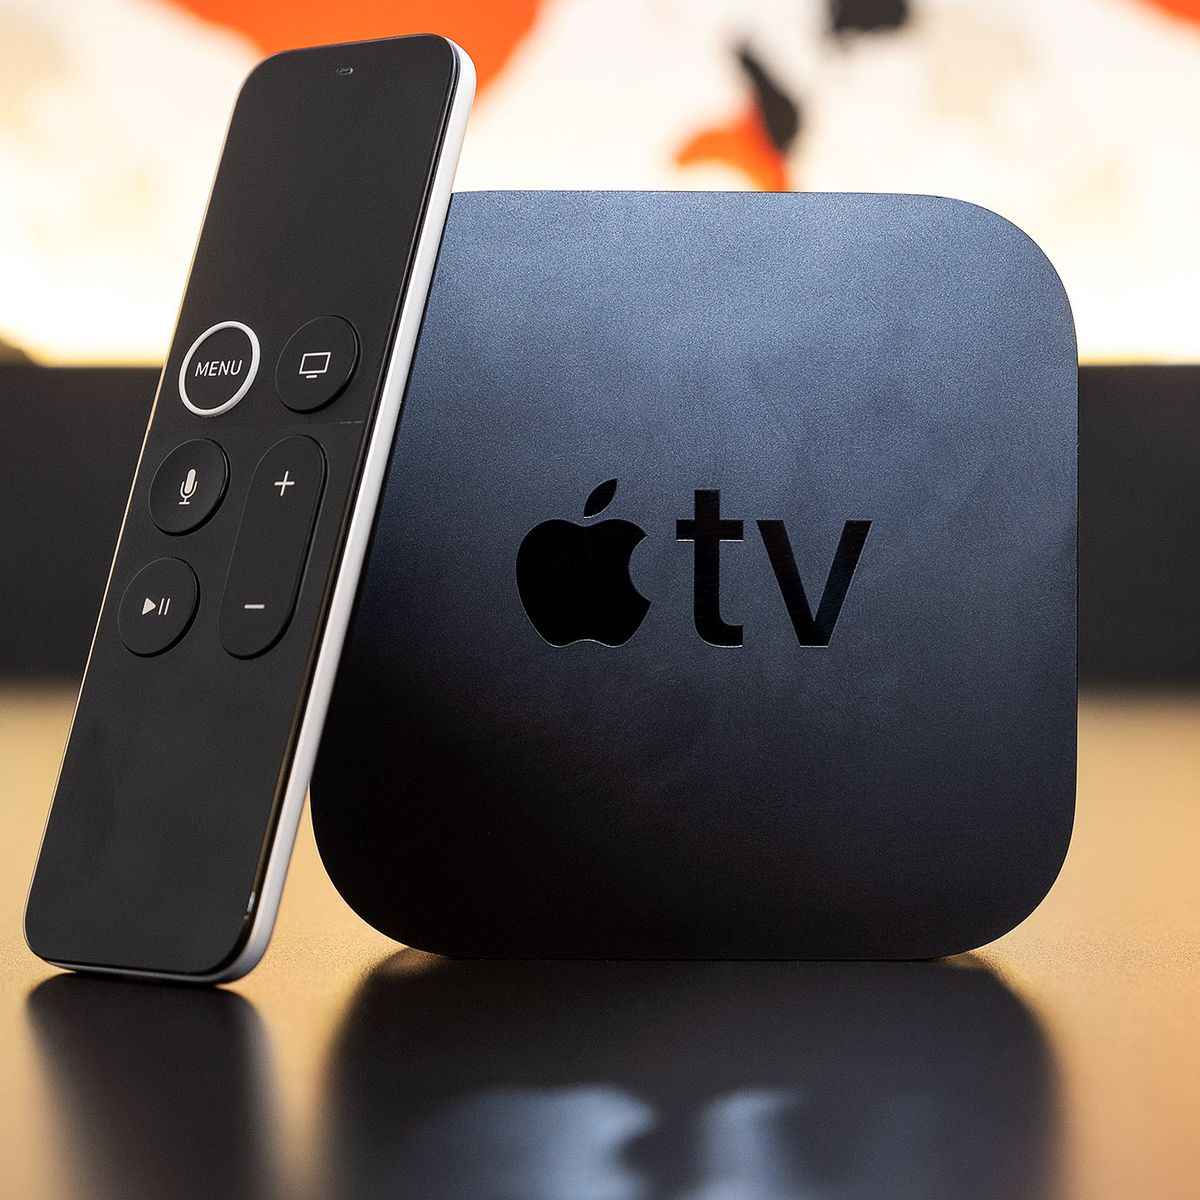 The Apple TV 4K, the best streaming device user experience, on a table with the Siri remote.